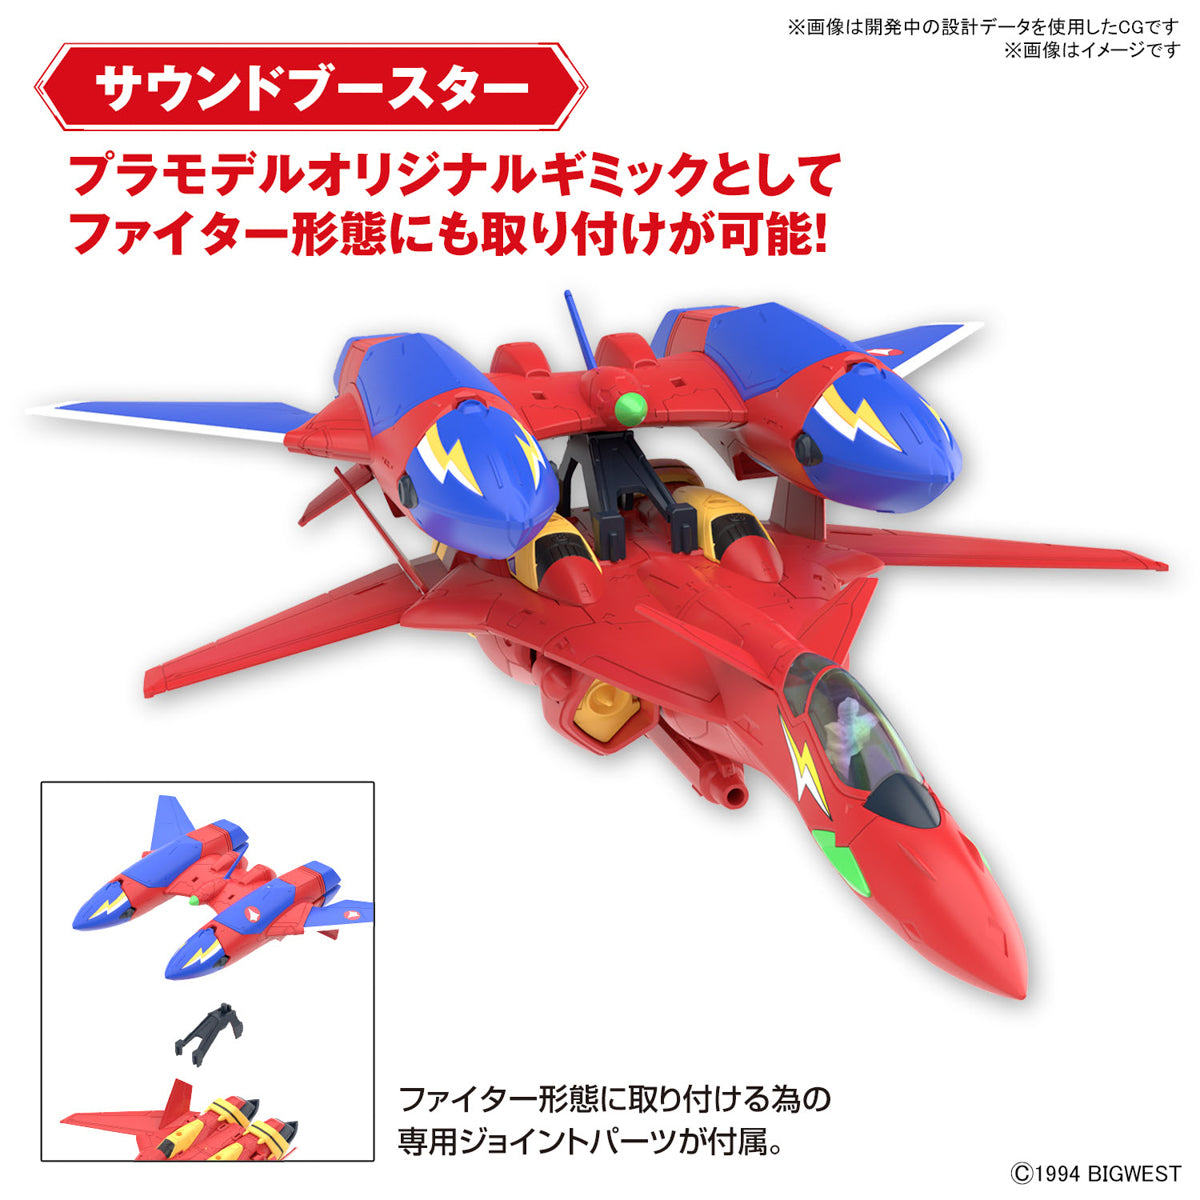 [PRE-ORDER] HG 1/100 VF-19 Fire Valkyrie with Sound Booster (Macross)